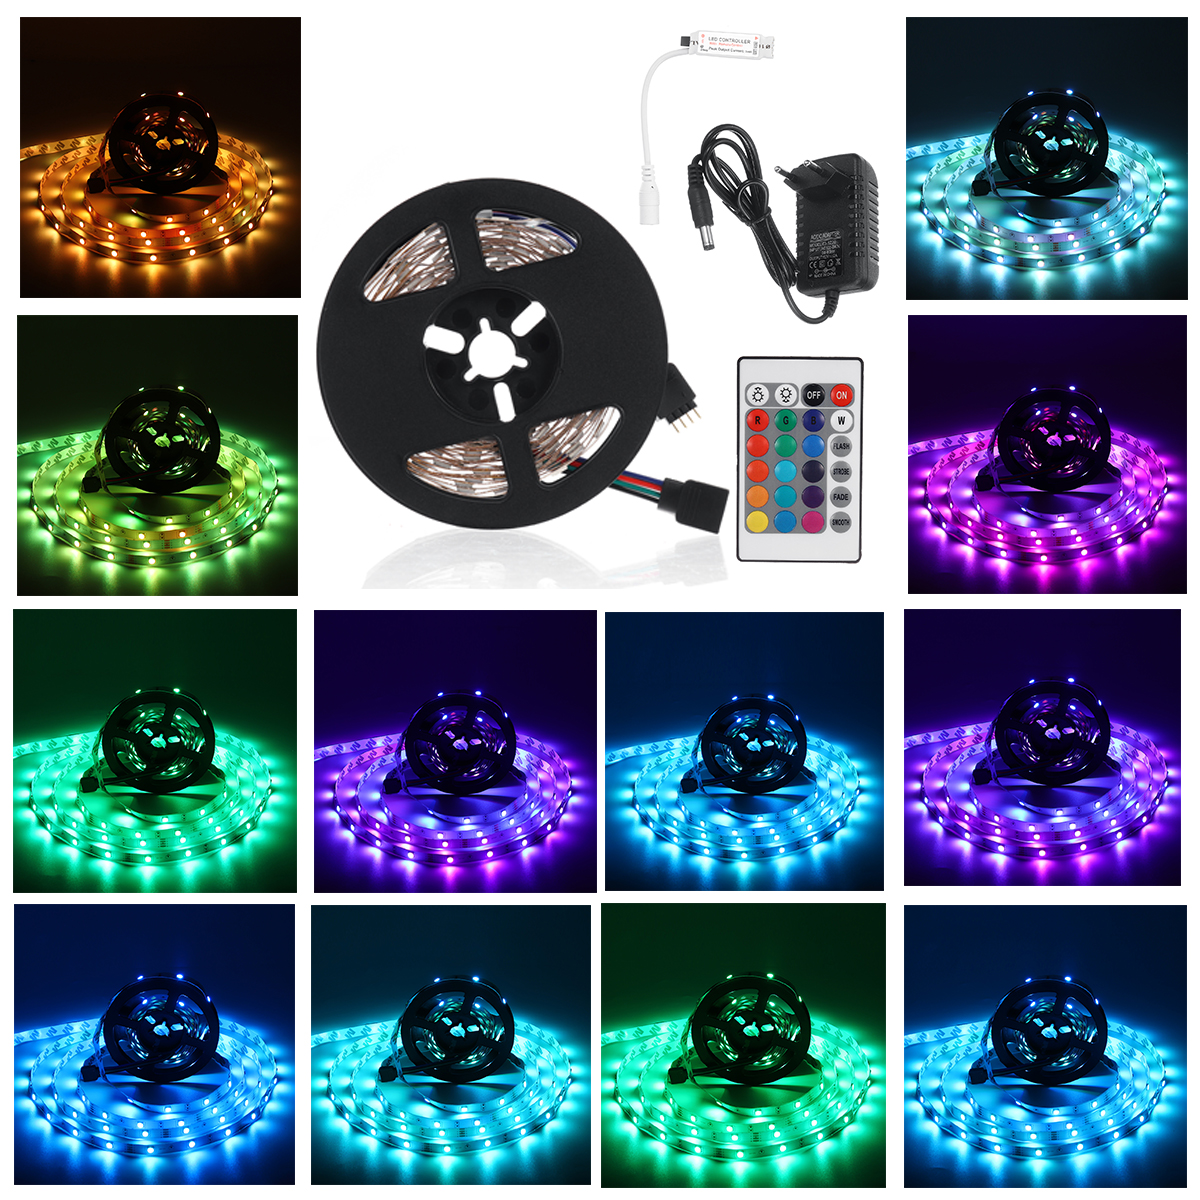 5M-DC12V-LED-Strip-Light-5050-RGB-Rope-Flexible-Changing-Lamp-with-Remote-Control-for-TV-Bedroom-Par-1618778-1